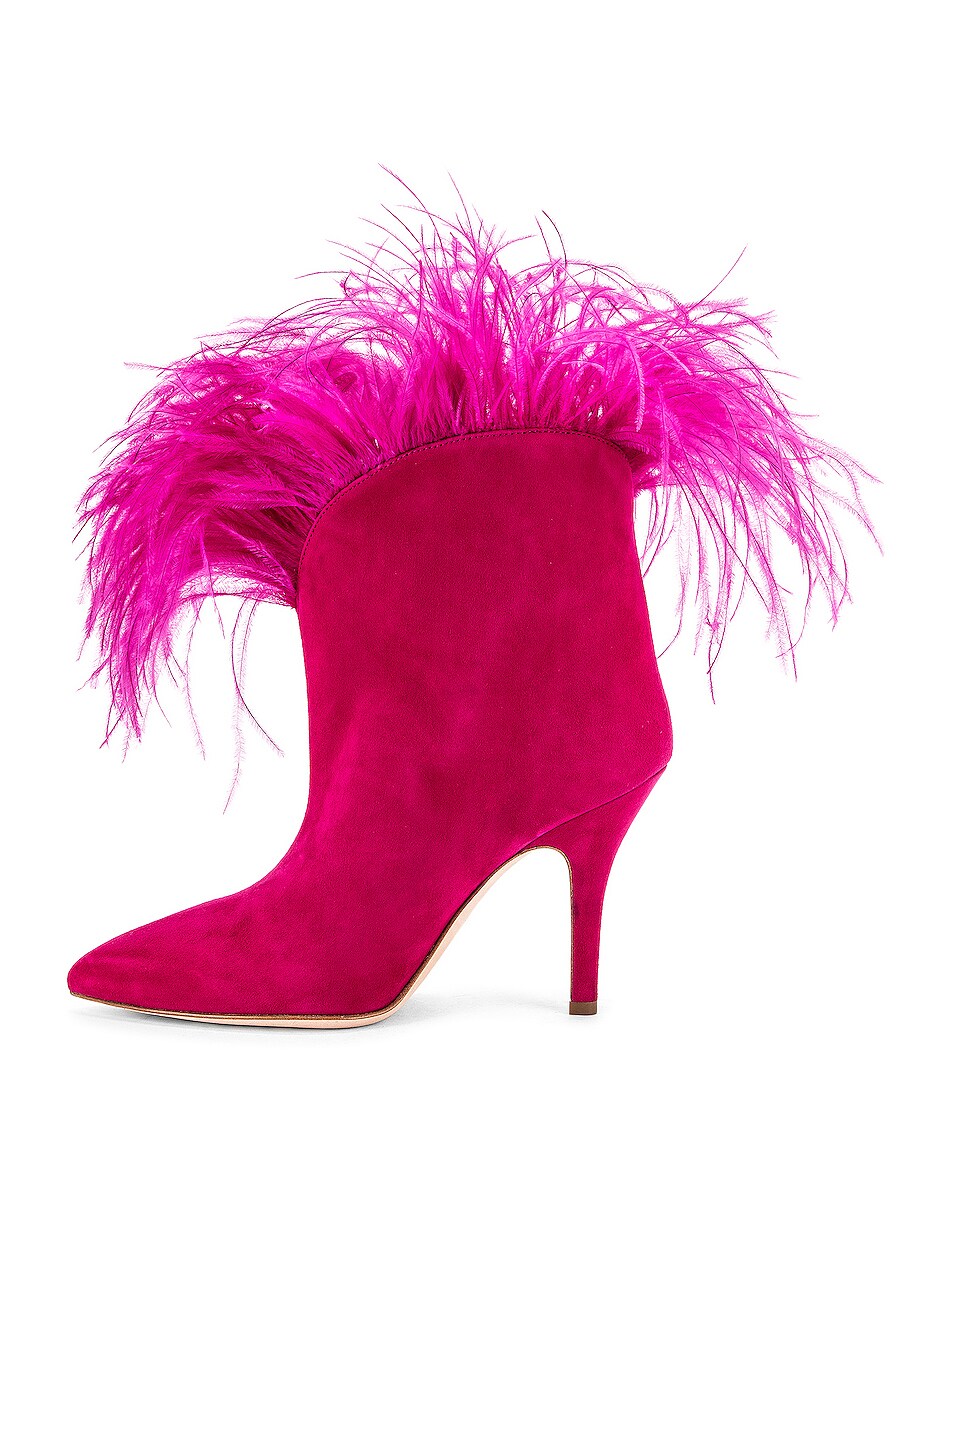 Paris Texas Suede Stiletto Ankle boot with Marabou Feathers in Fuchsia ...